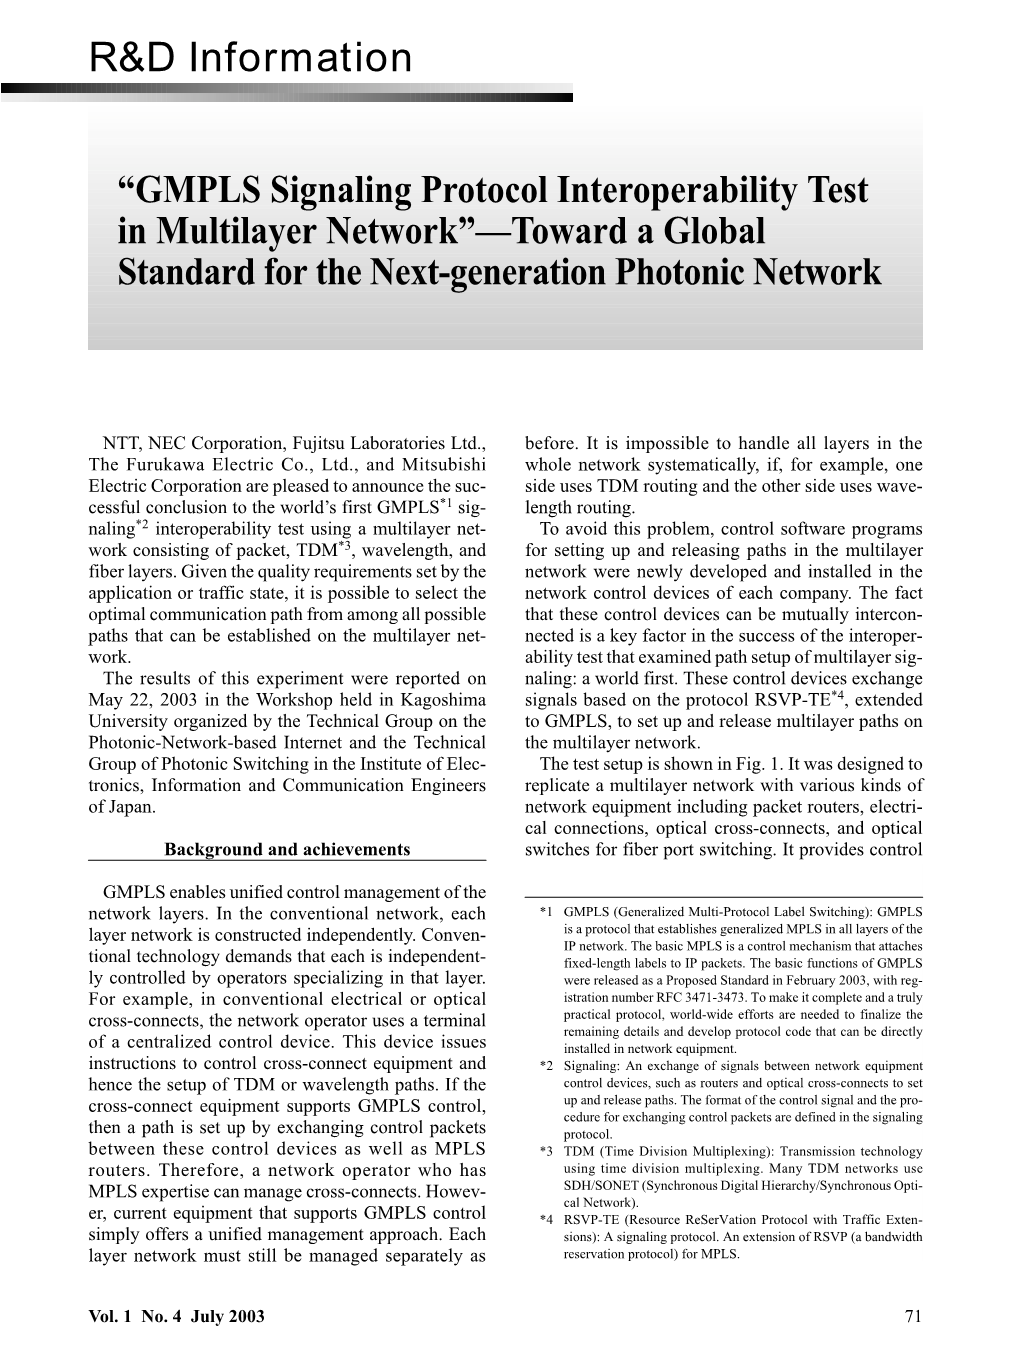 GMPLS Signaling Protocol Interoperability Test in Multilayer Network”—Toward a Global Standard for the Next-Generation Photonic Network